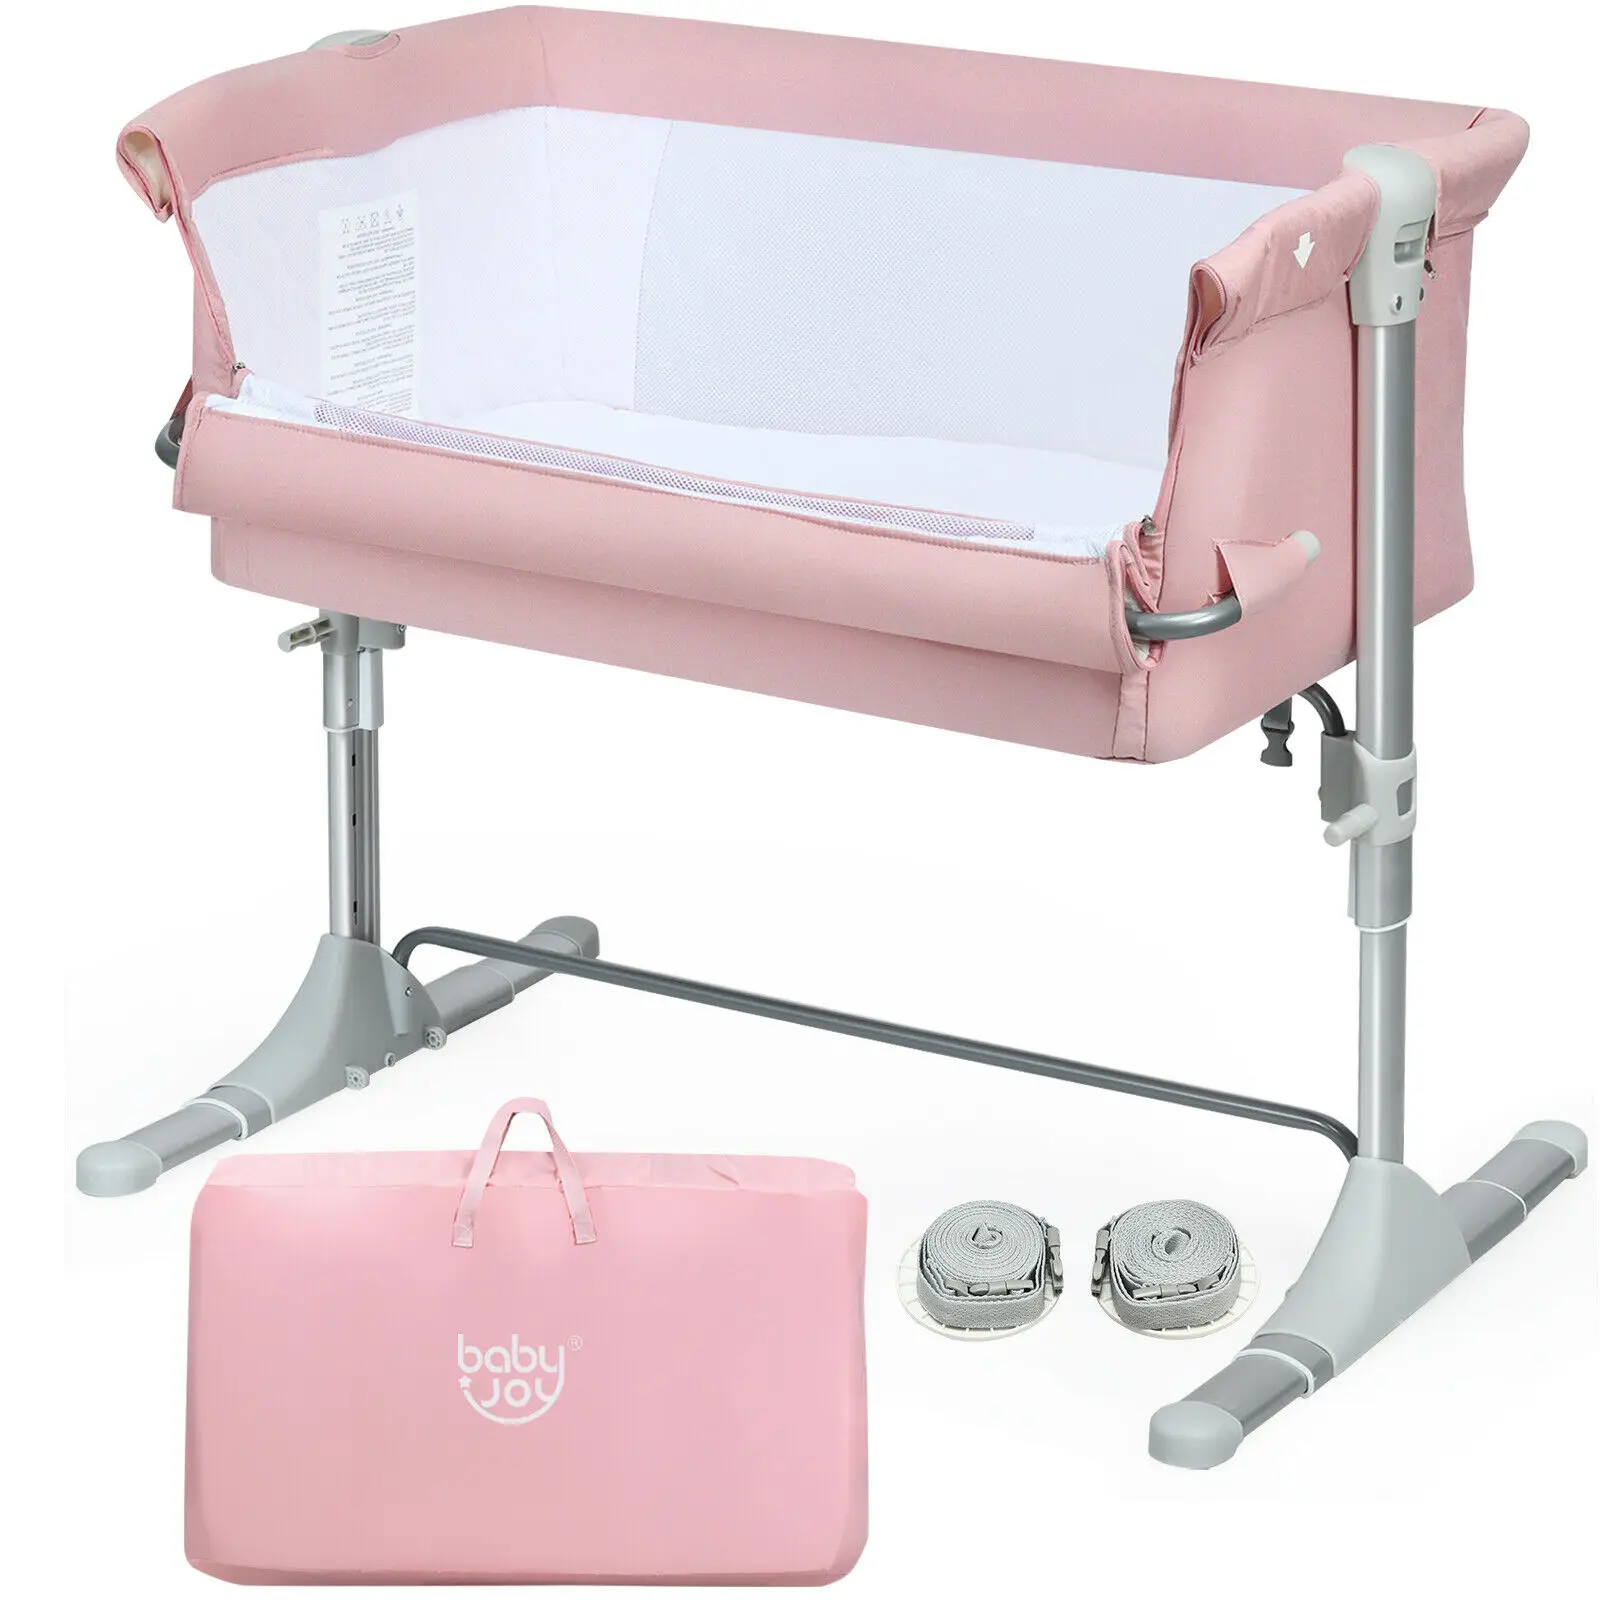 Portable Baby Bed Side Sleeper Infant Travel Bassinet Crib W/Carrying Bag